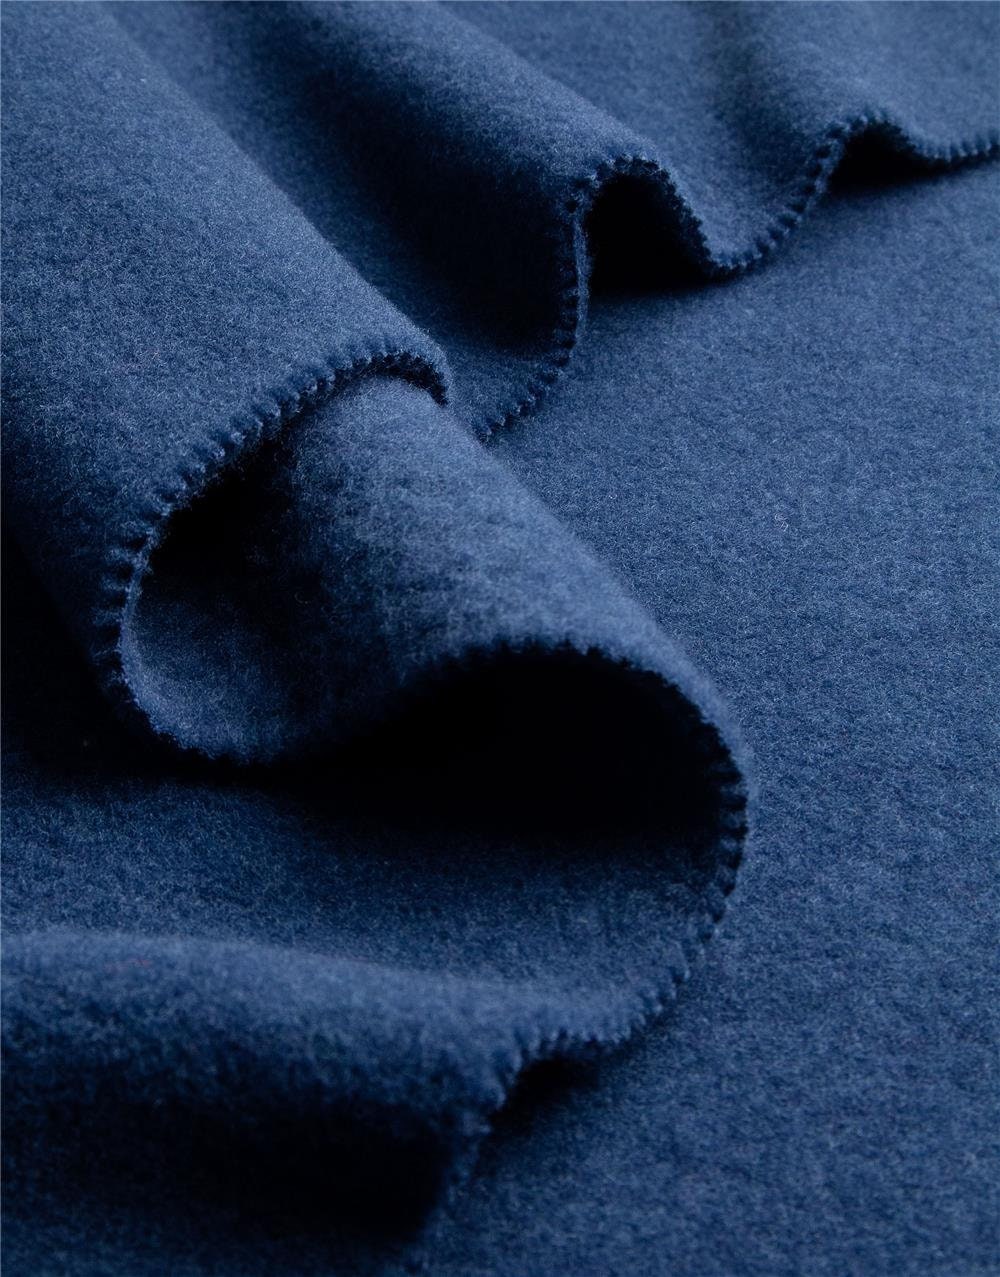 Blue Two-sided brushed Fleece